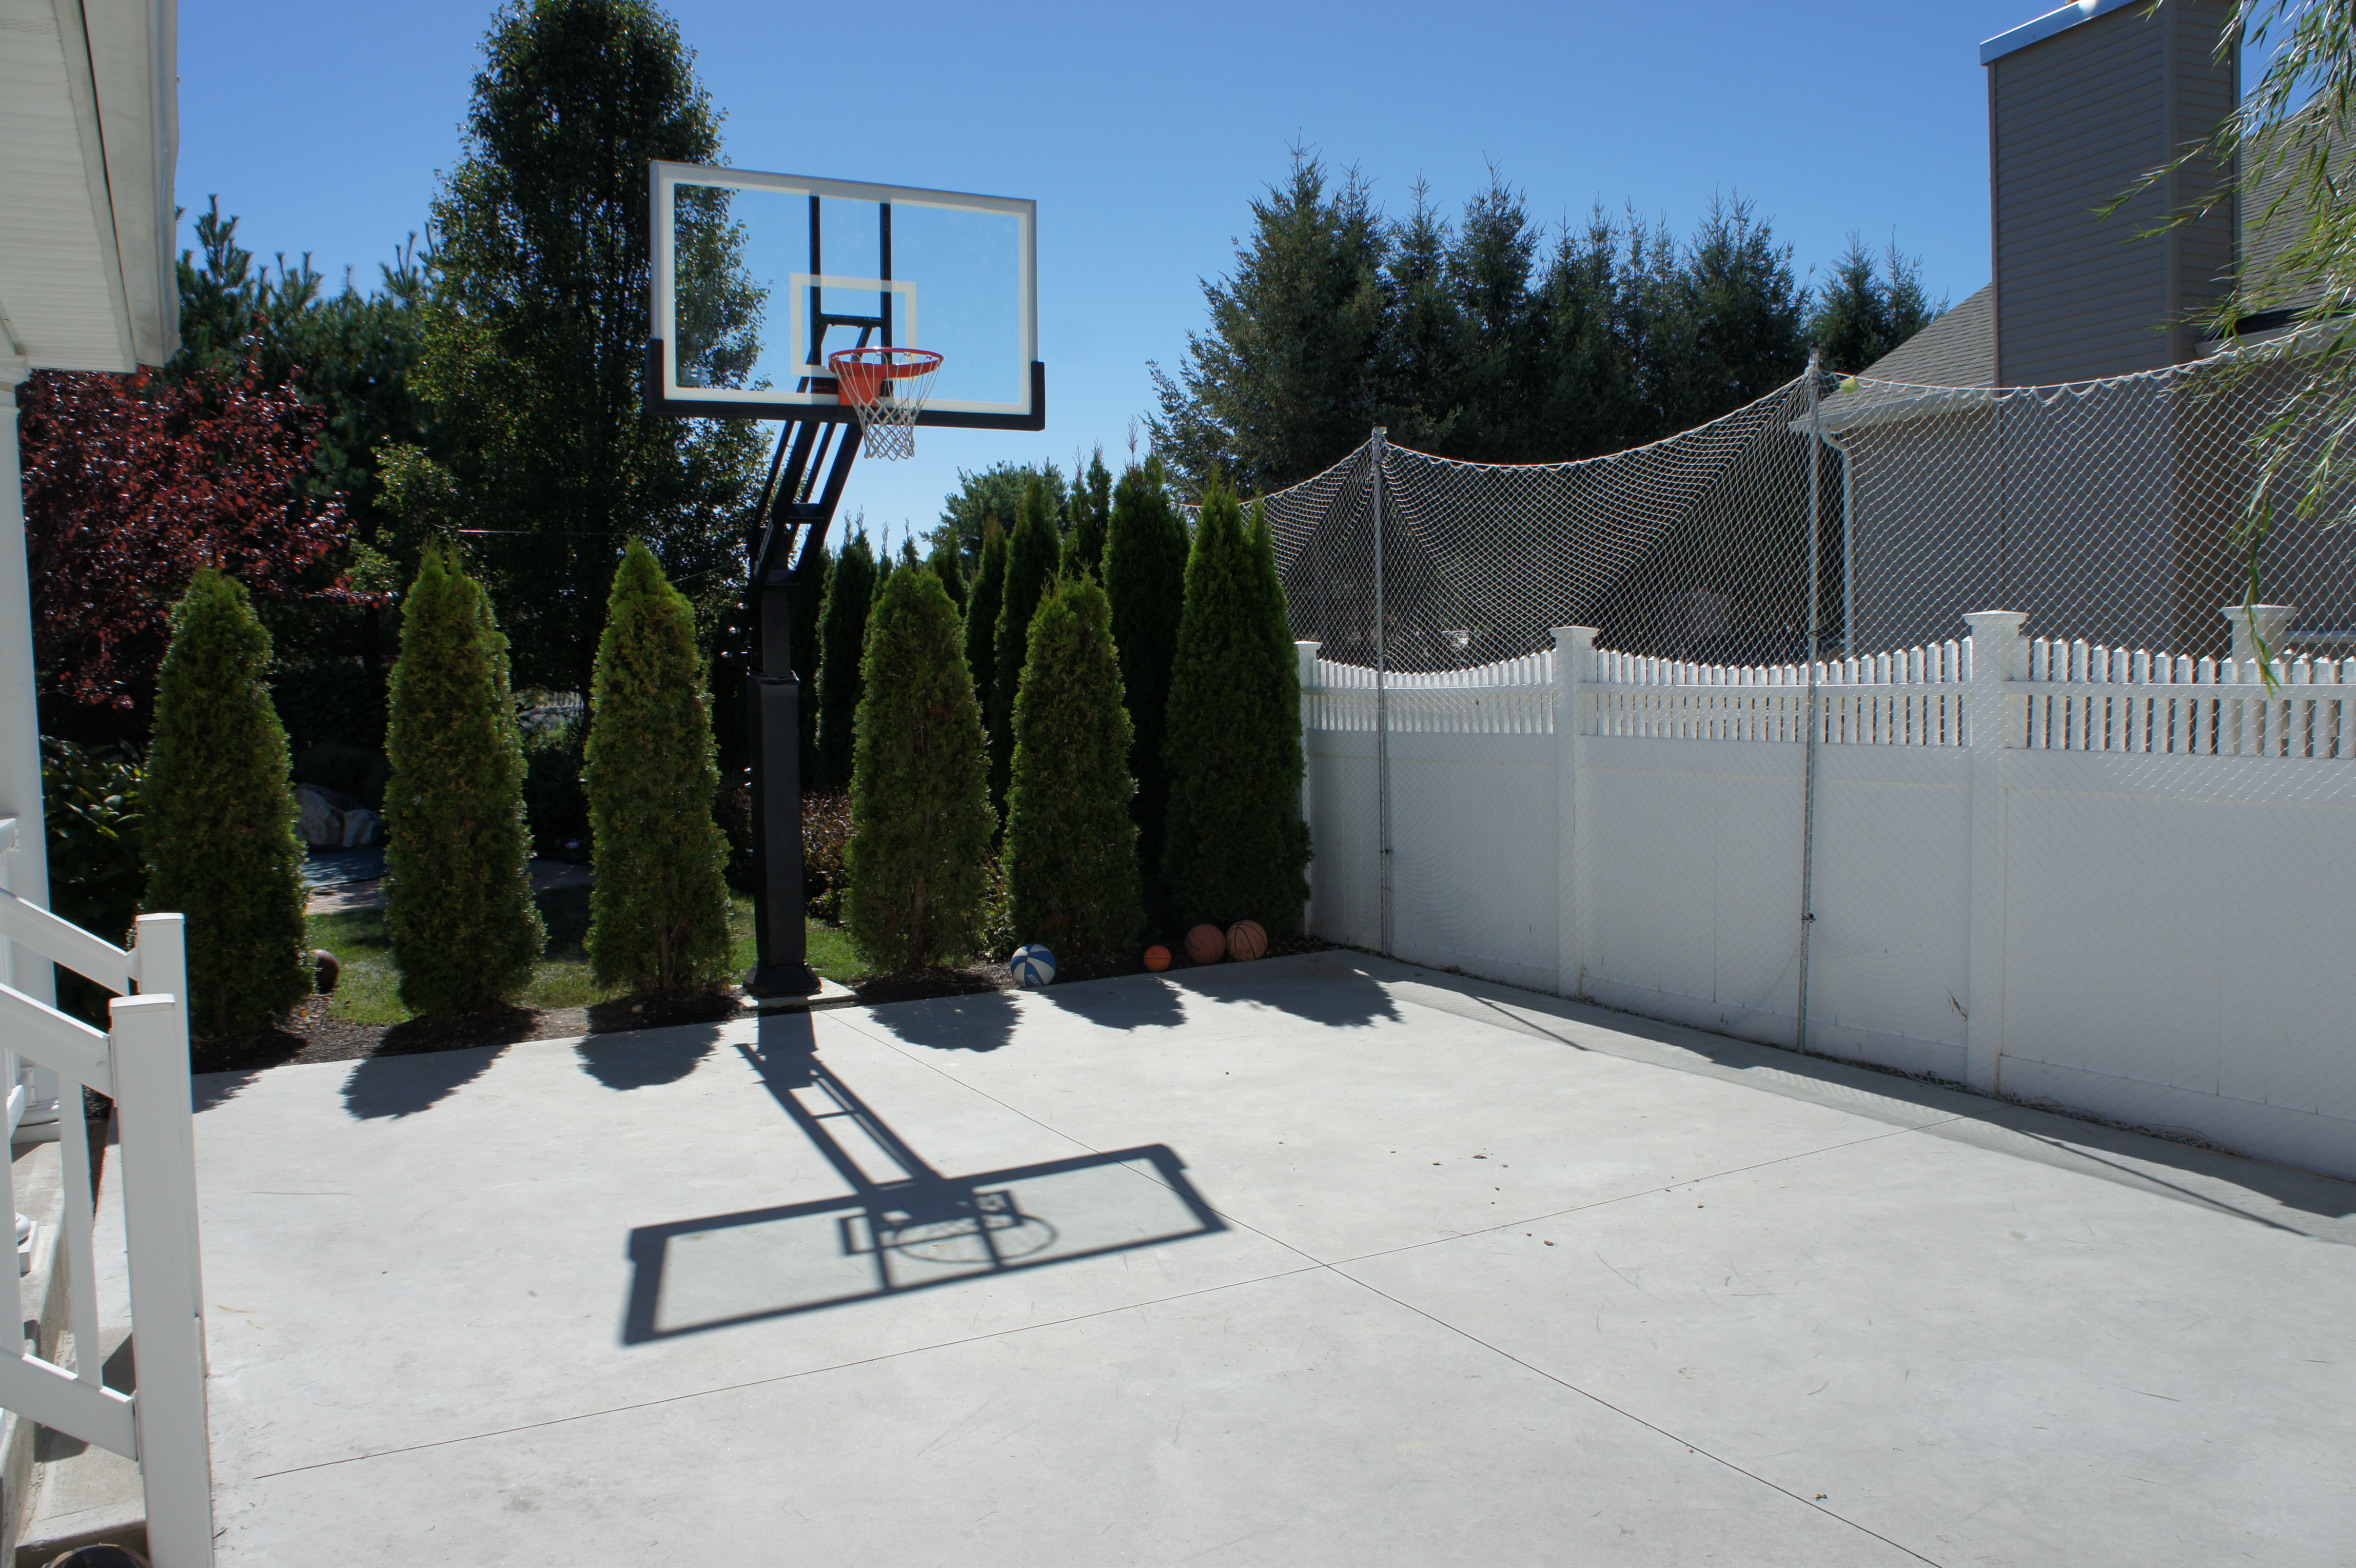 In the middle you can see Pro Dunk Diamond Basketball System.
